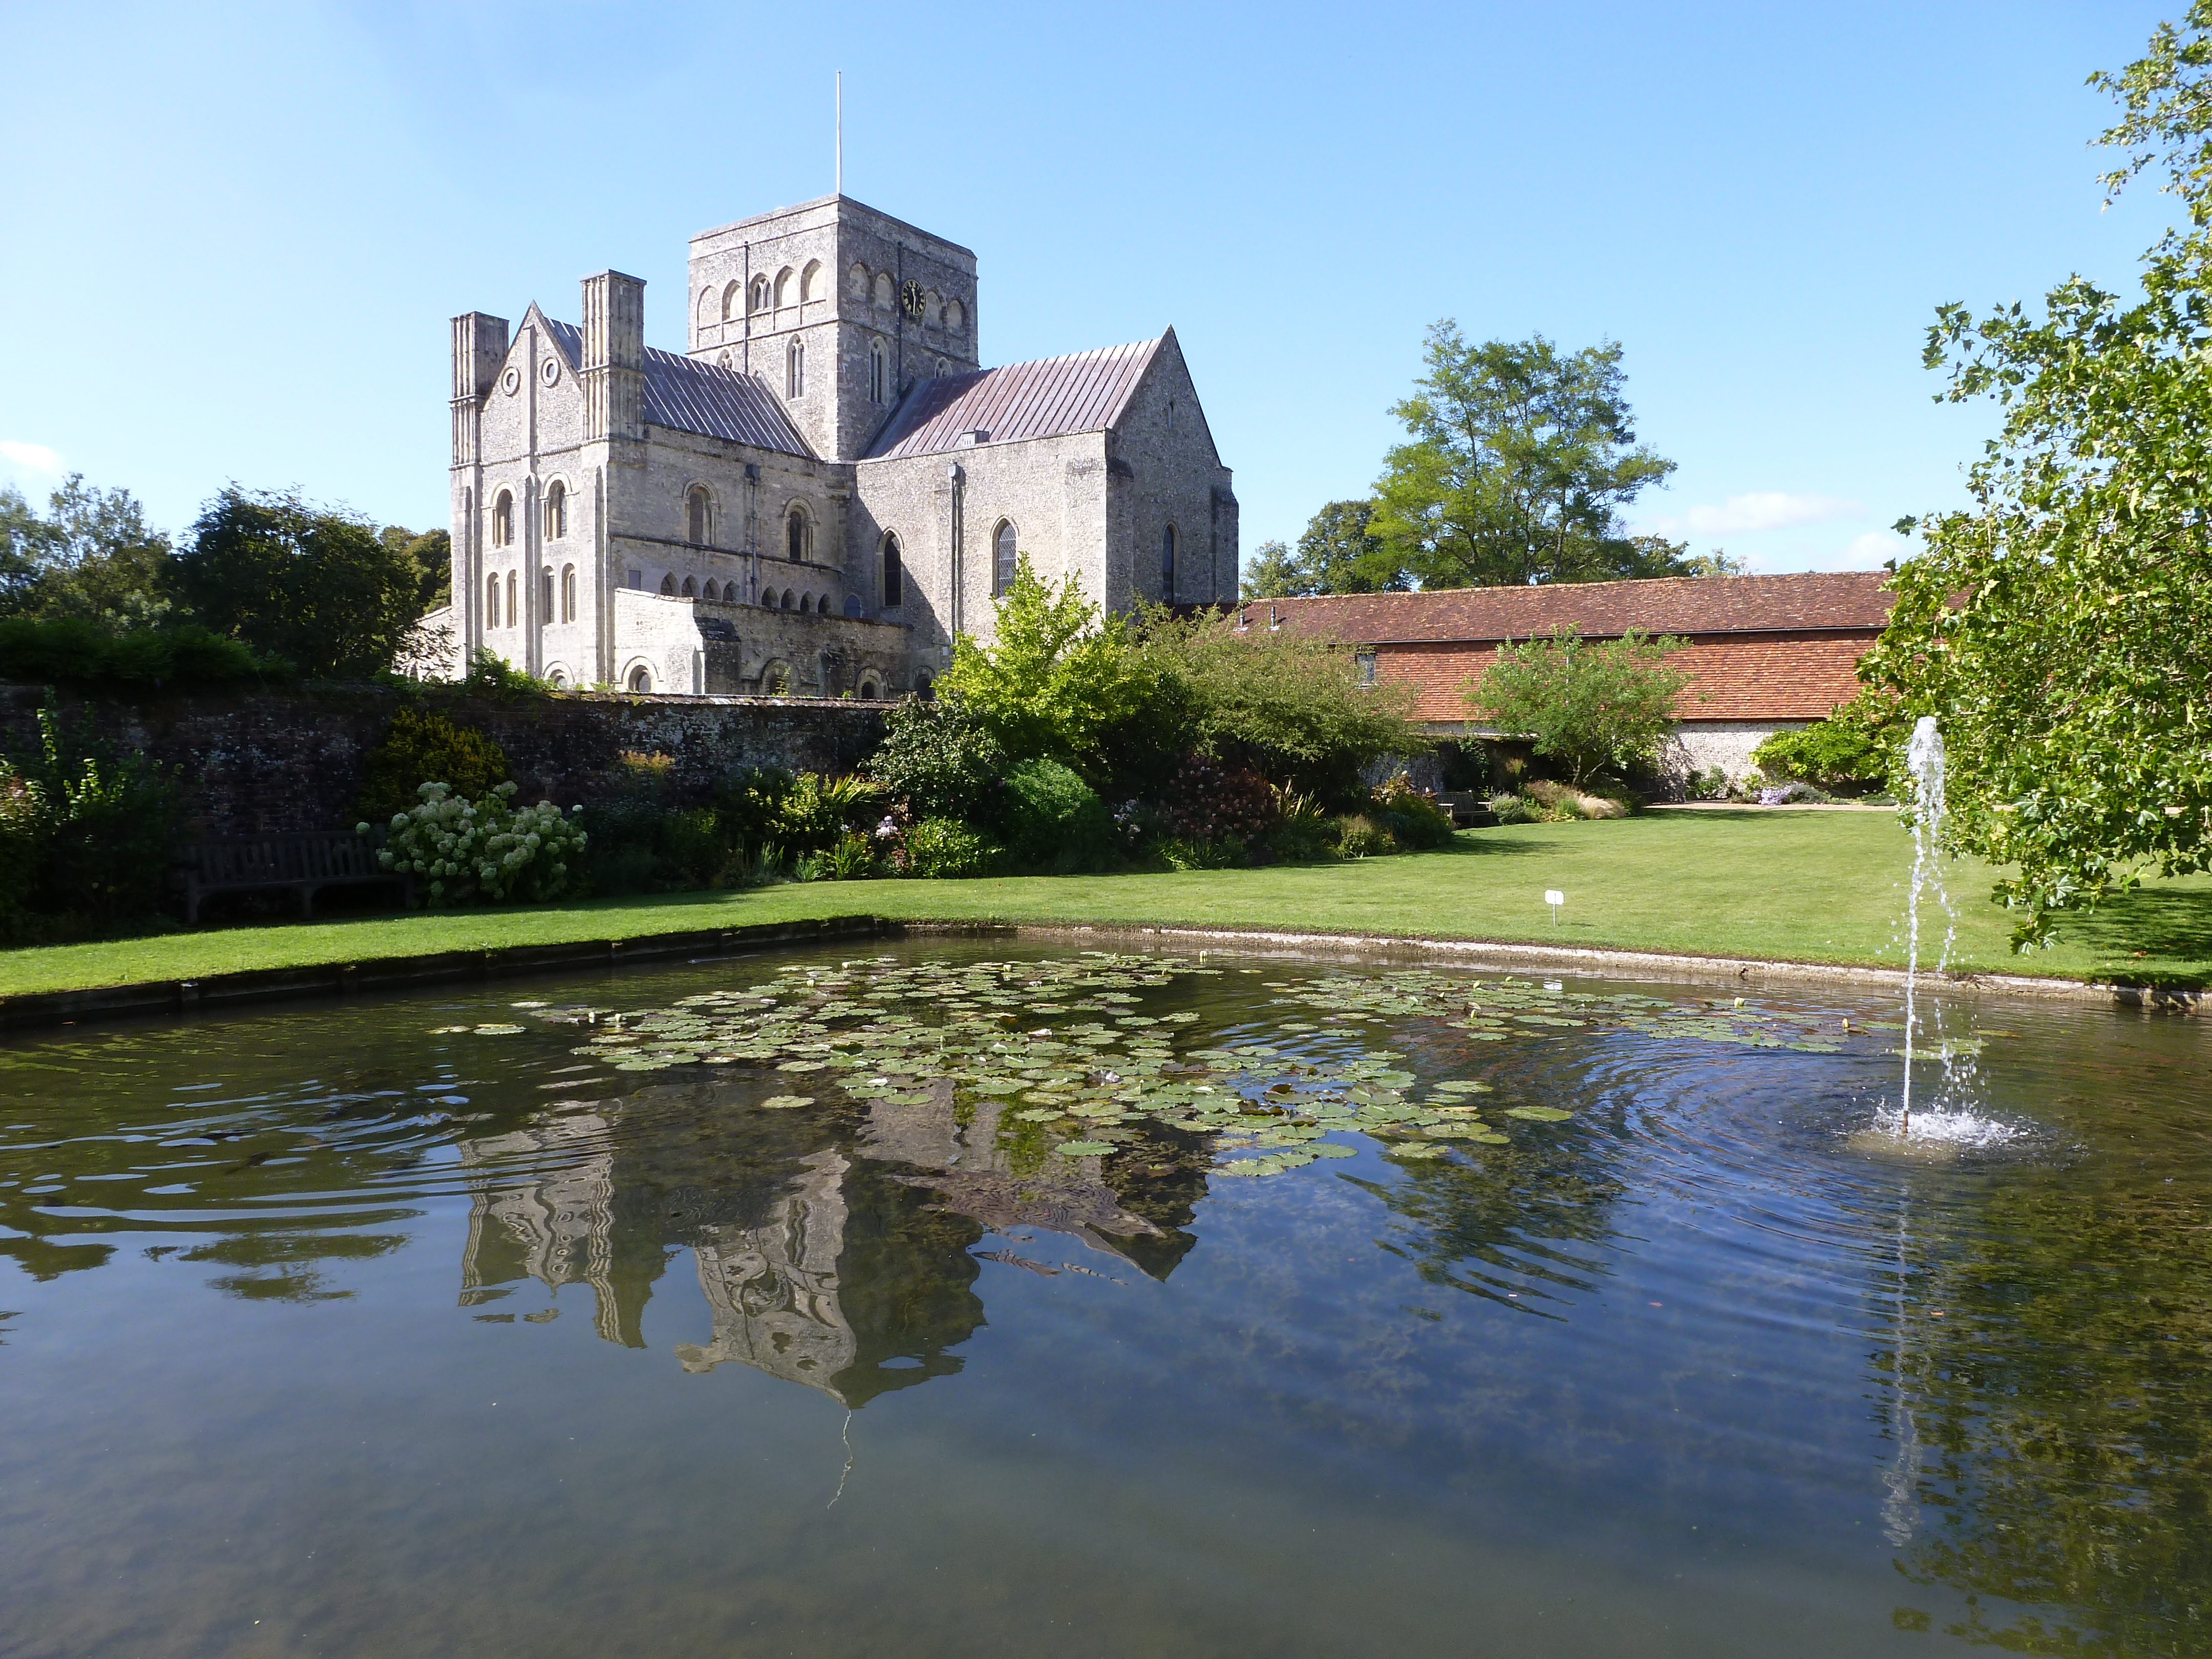 New Forest Centre RWW visit ‘The Hospital of St Cross’ and ‘Almshouse of Noble Poverty’, Winchester on the 4th September 2019